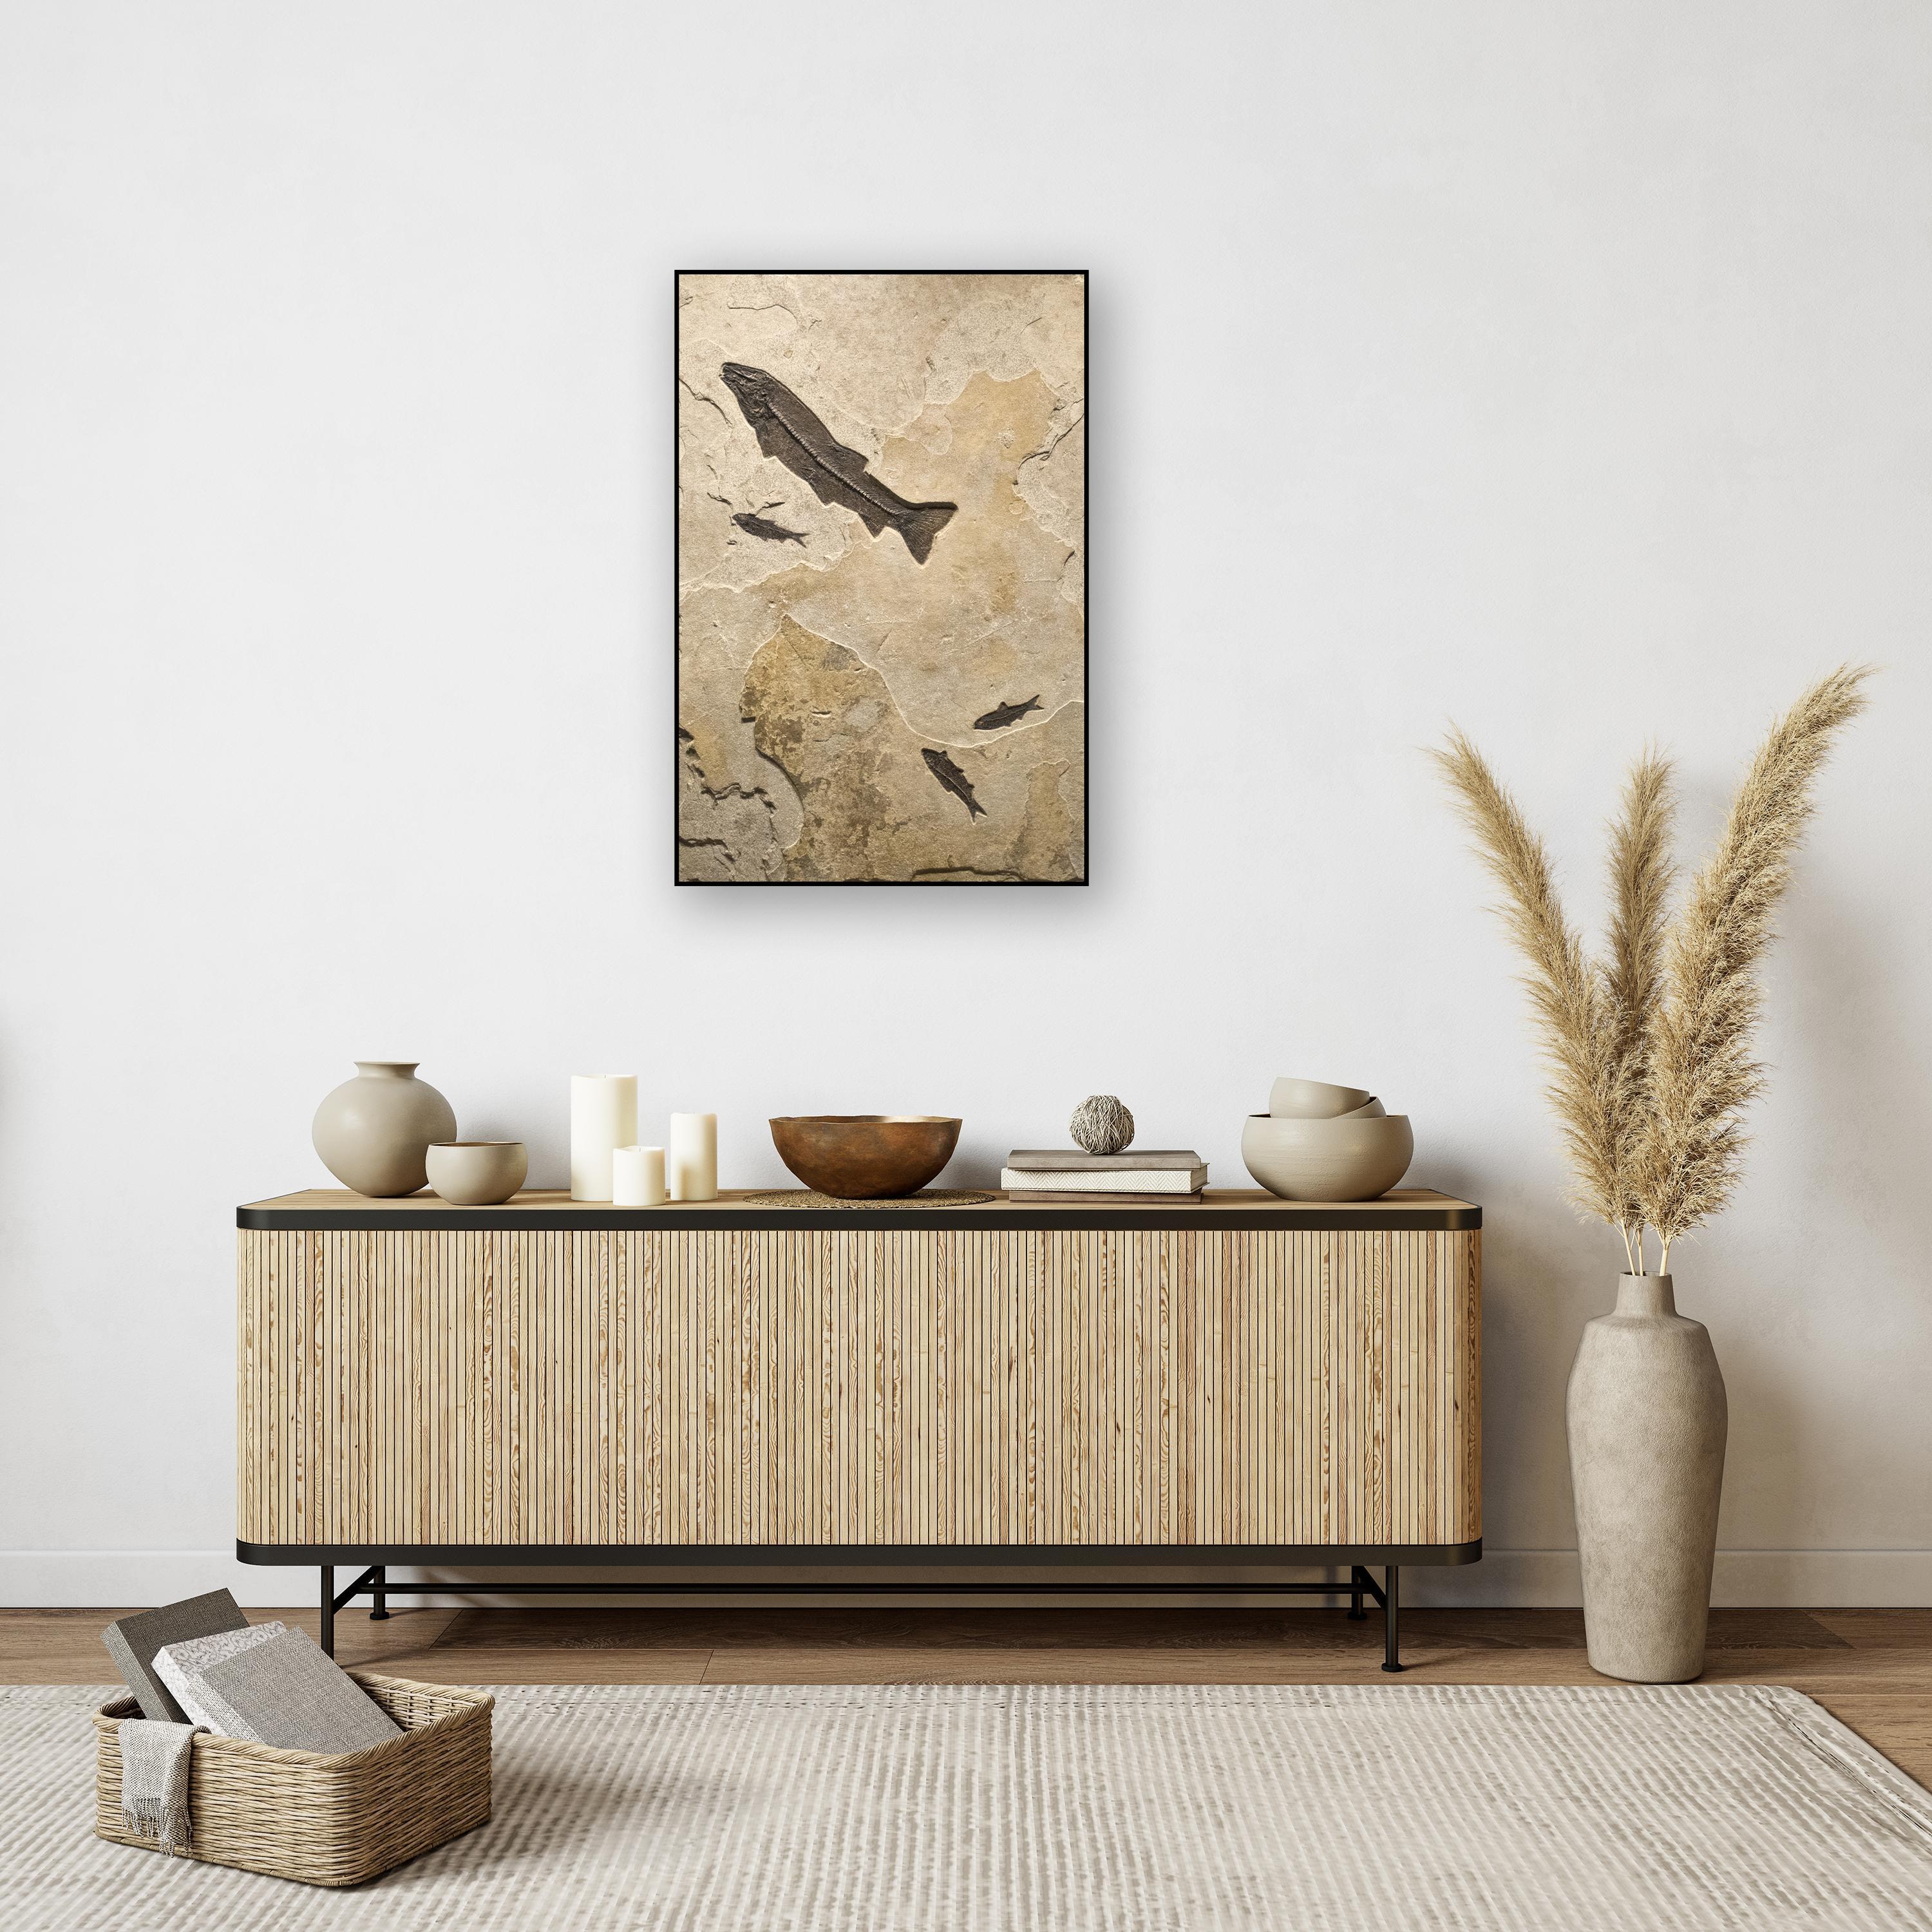 An exquisite piece of natural history makes an incredible statement and works beautifully with design styles ranging from traditional to modern. This unique fossil mural features one Notogoneus osculus and three Knightia eocaena, all of which are